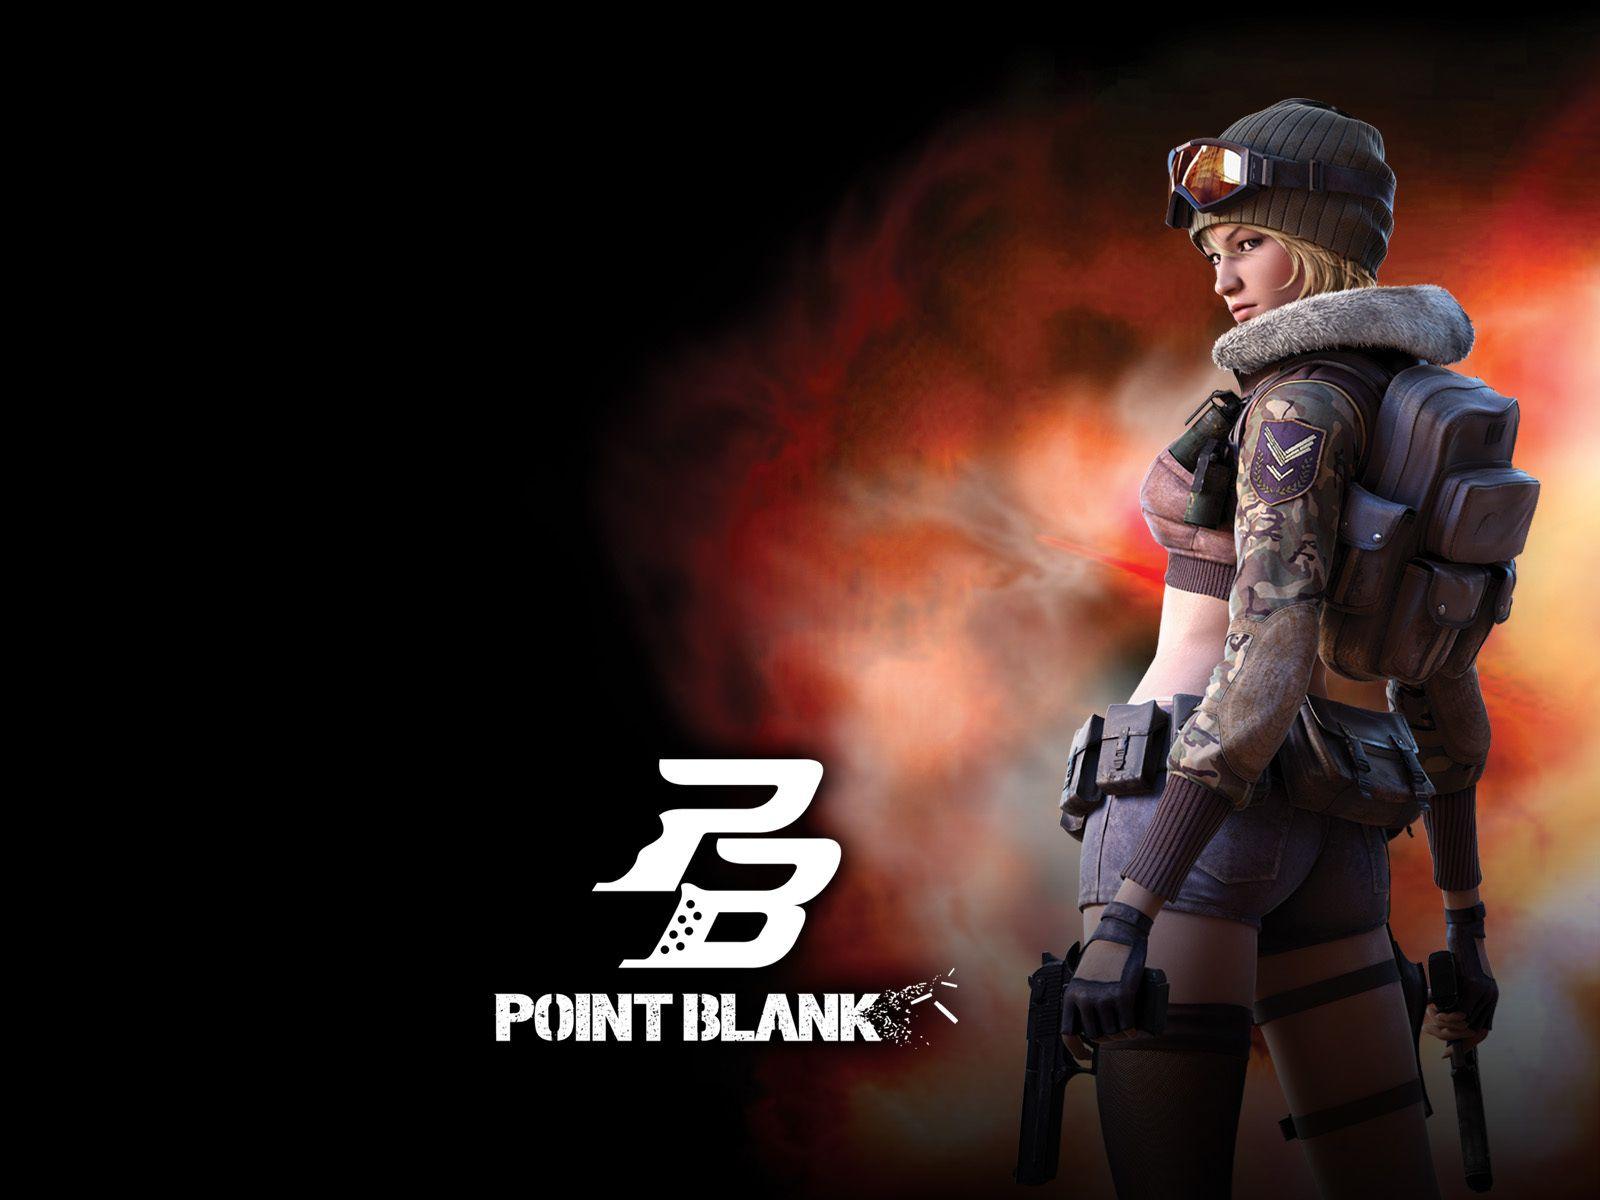 Point blank online image PB wallpaper HD wallpaper and background